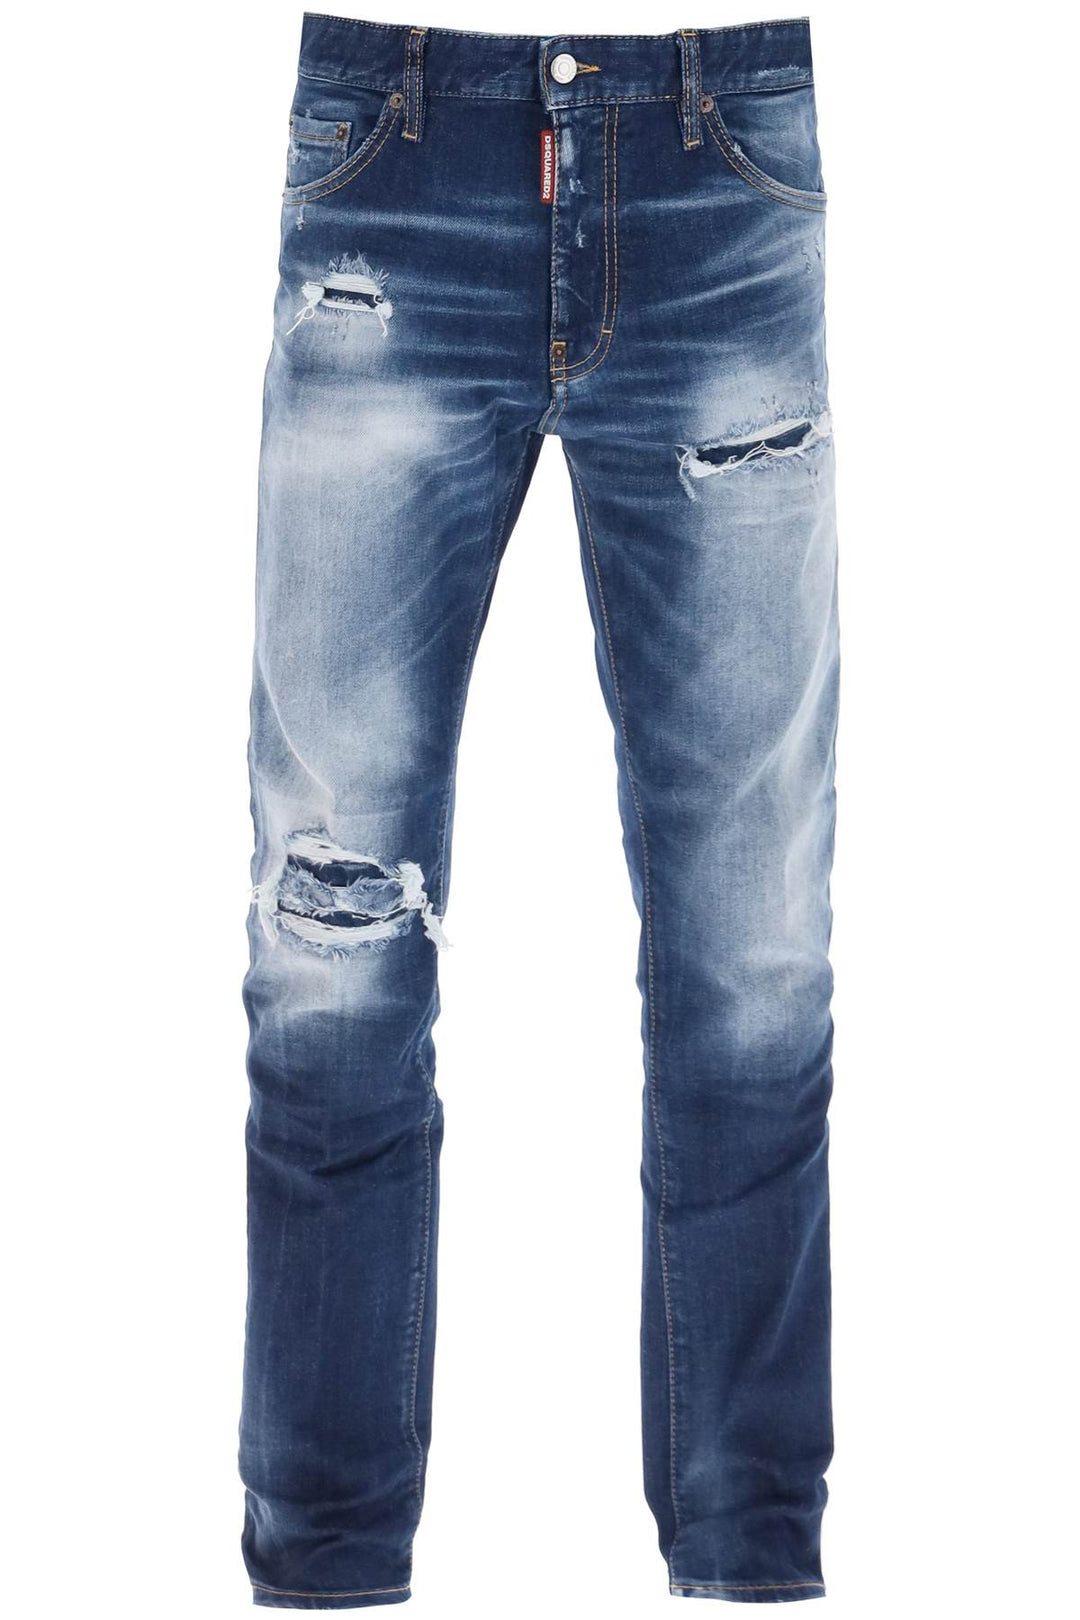 Dsquared2 Cool Guy Jeans In Medium Worn Out Booty Wash   Blu